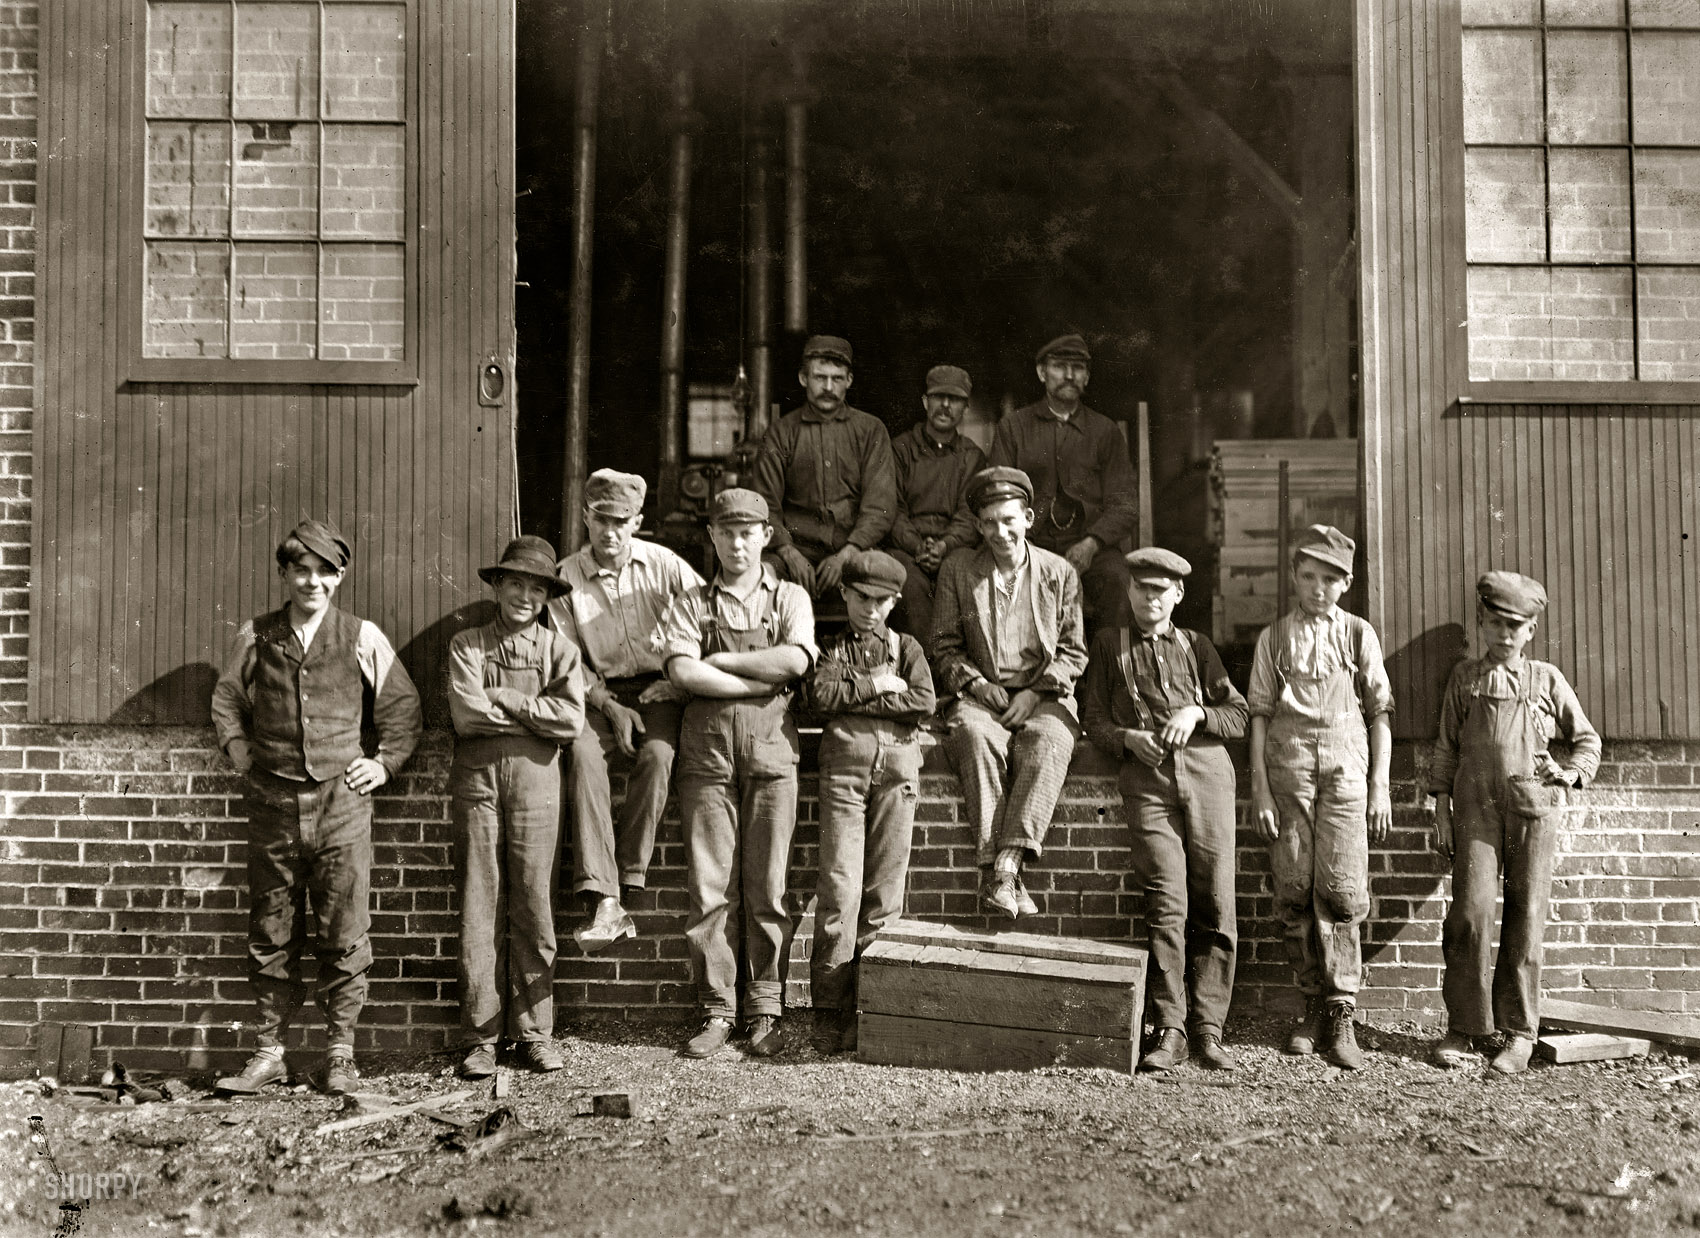 October 1908. Evansville, Indiana. "World Furniture Company, noon hour. Boy at left hand end was running machine composed of two unguarded circular Saws. The board he was pushing stuck and he gave it an impatient shove. Had he slipped, both hands and arms would have gone into the edges of the saws." Photograph and caption by Lewis Wickes Hine. View full size.